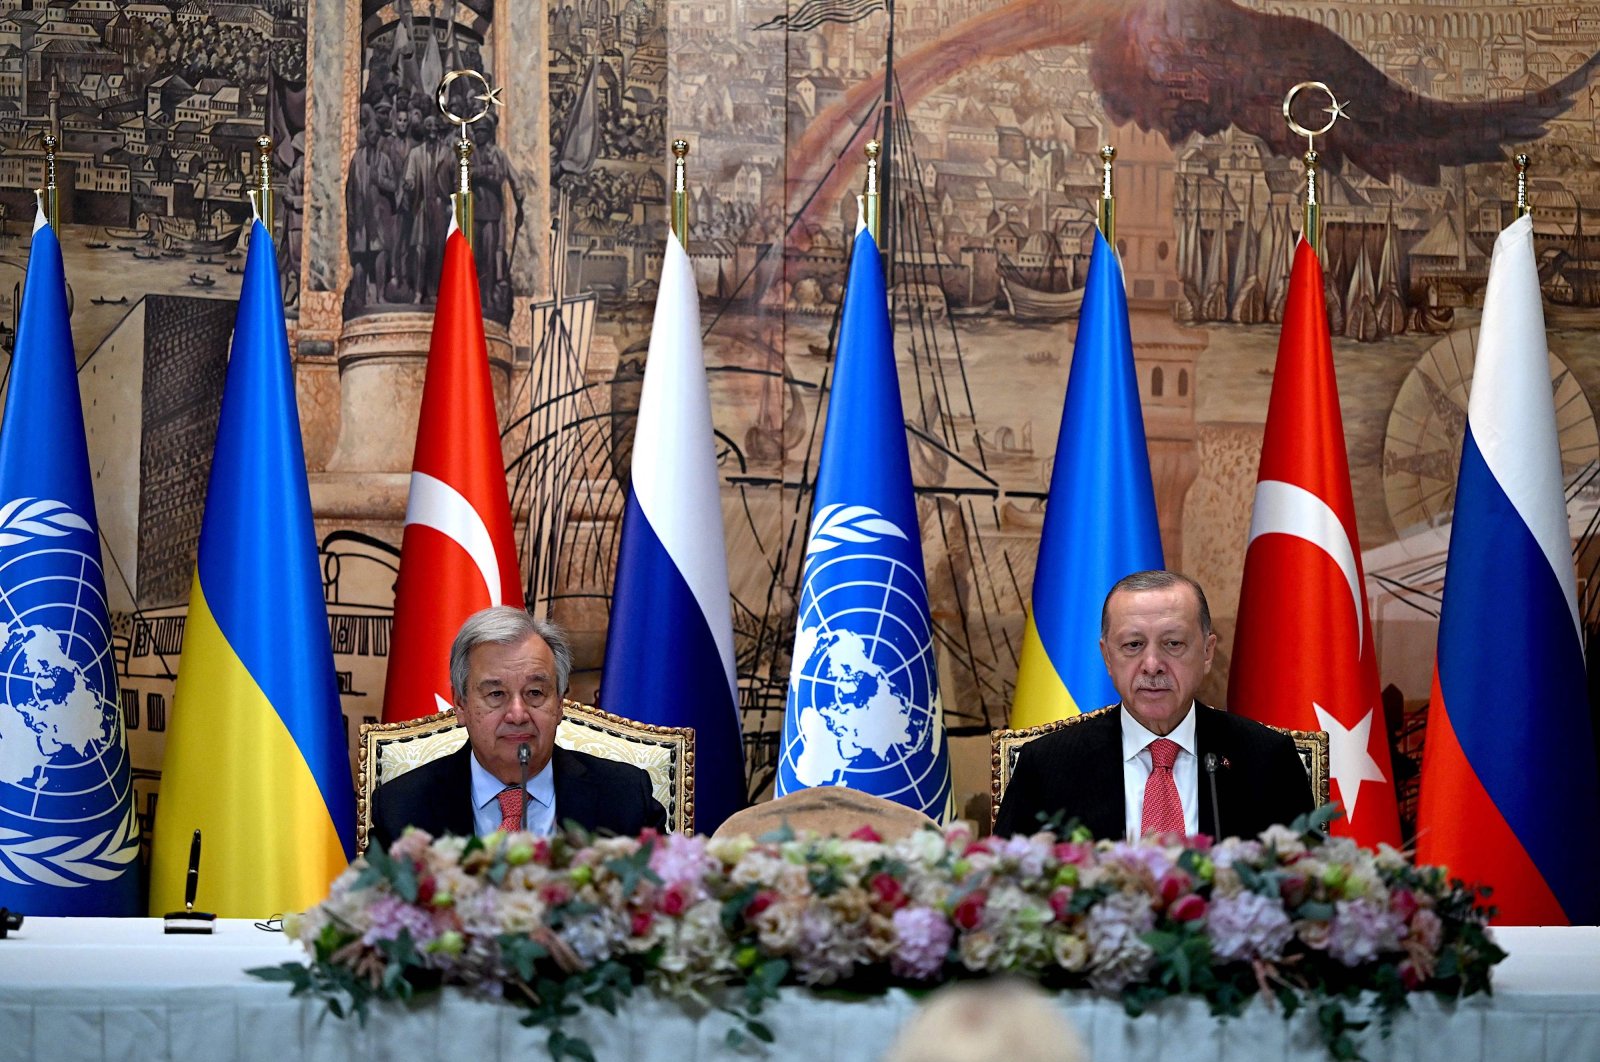 United Nations Secretary-General Antonio Guterres (L) and President Recep Tayyip Erdoğan sit at the start of the signature ceremony of an initiative on the safe transportation of grain and foodstuffs from Ukrainian ports, in Istanbul, Turkey, July 22, 2022. (AFP Photo)